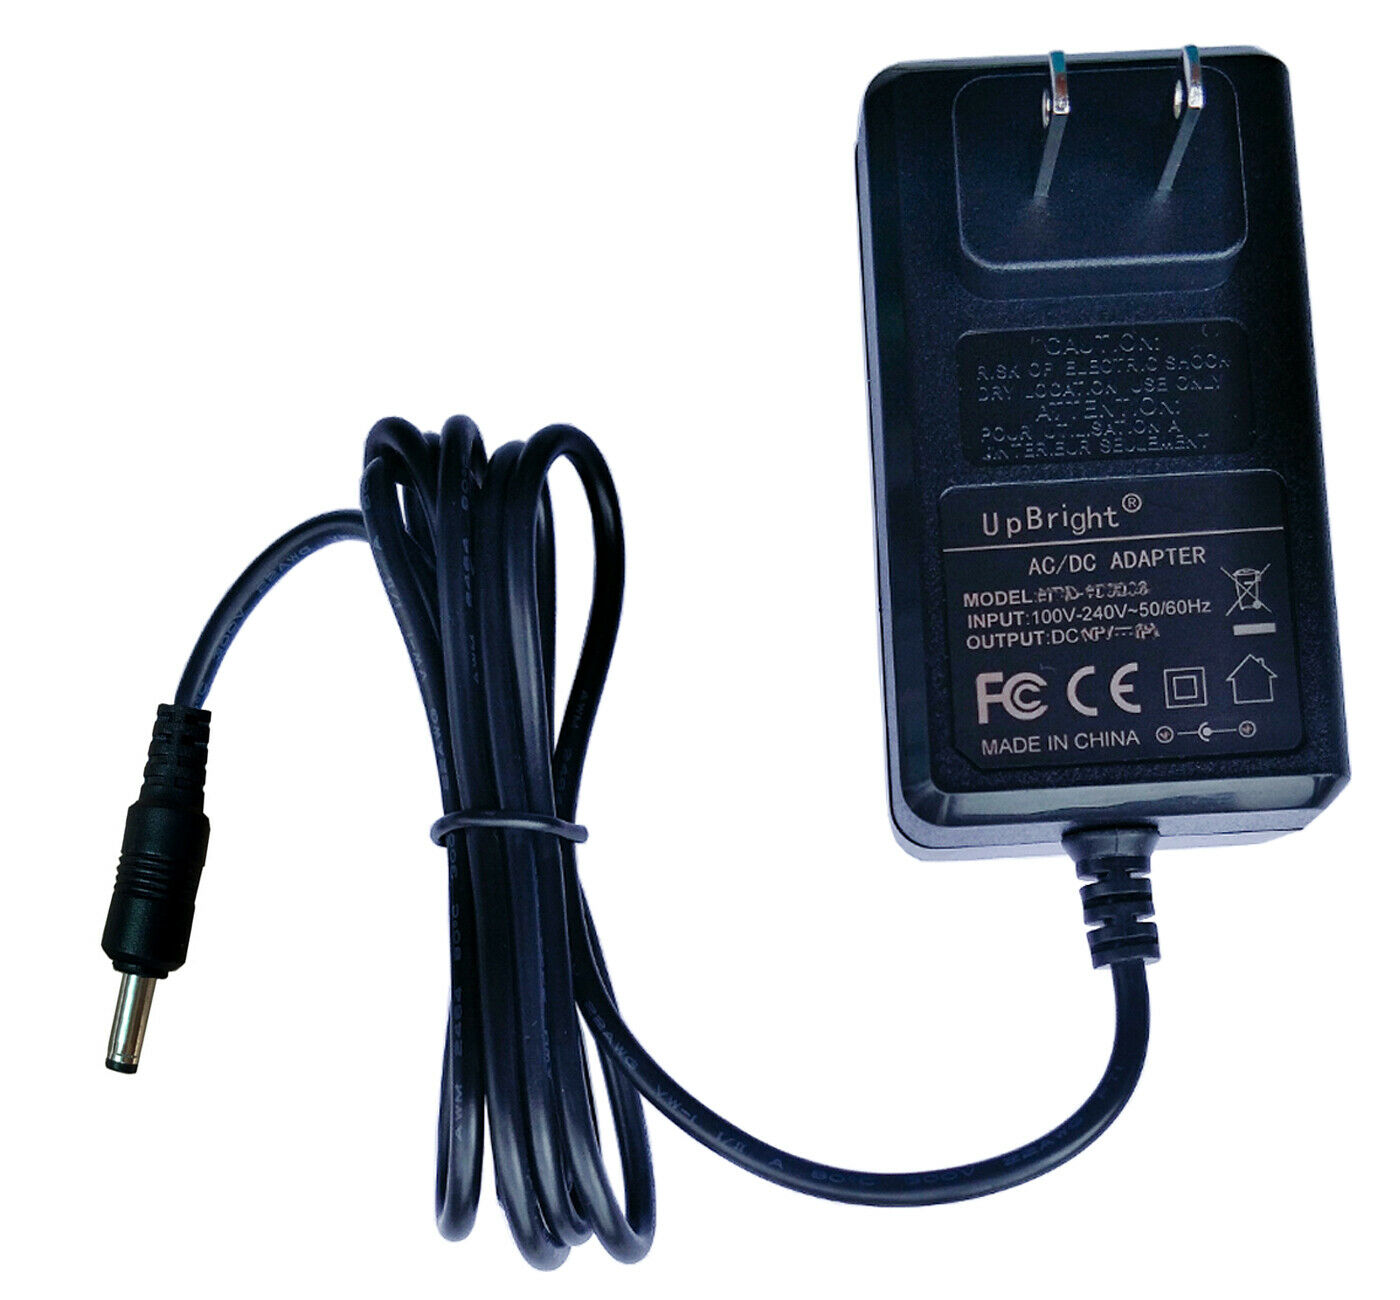 12V AC Adapter For Intermec AE16 851-061-208 AD20 AD21 AD22 Power Supply Charger marca genérca